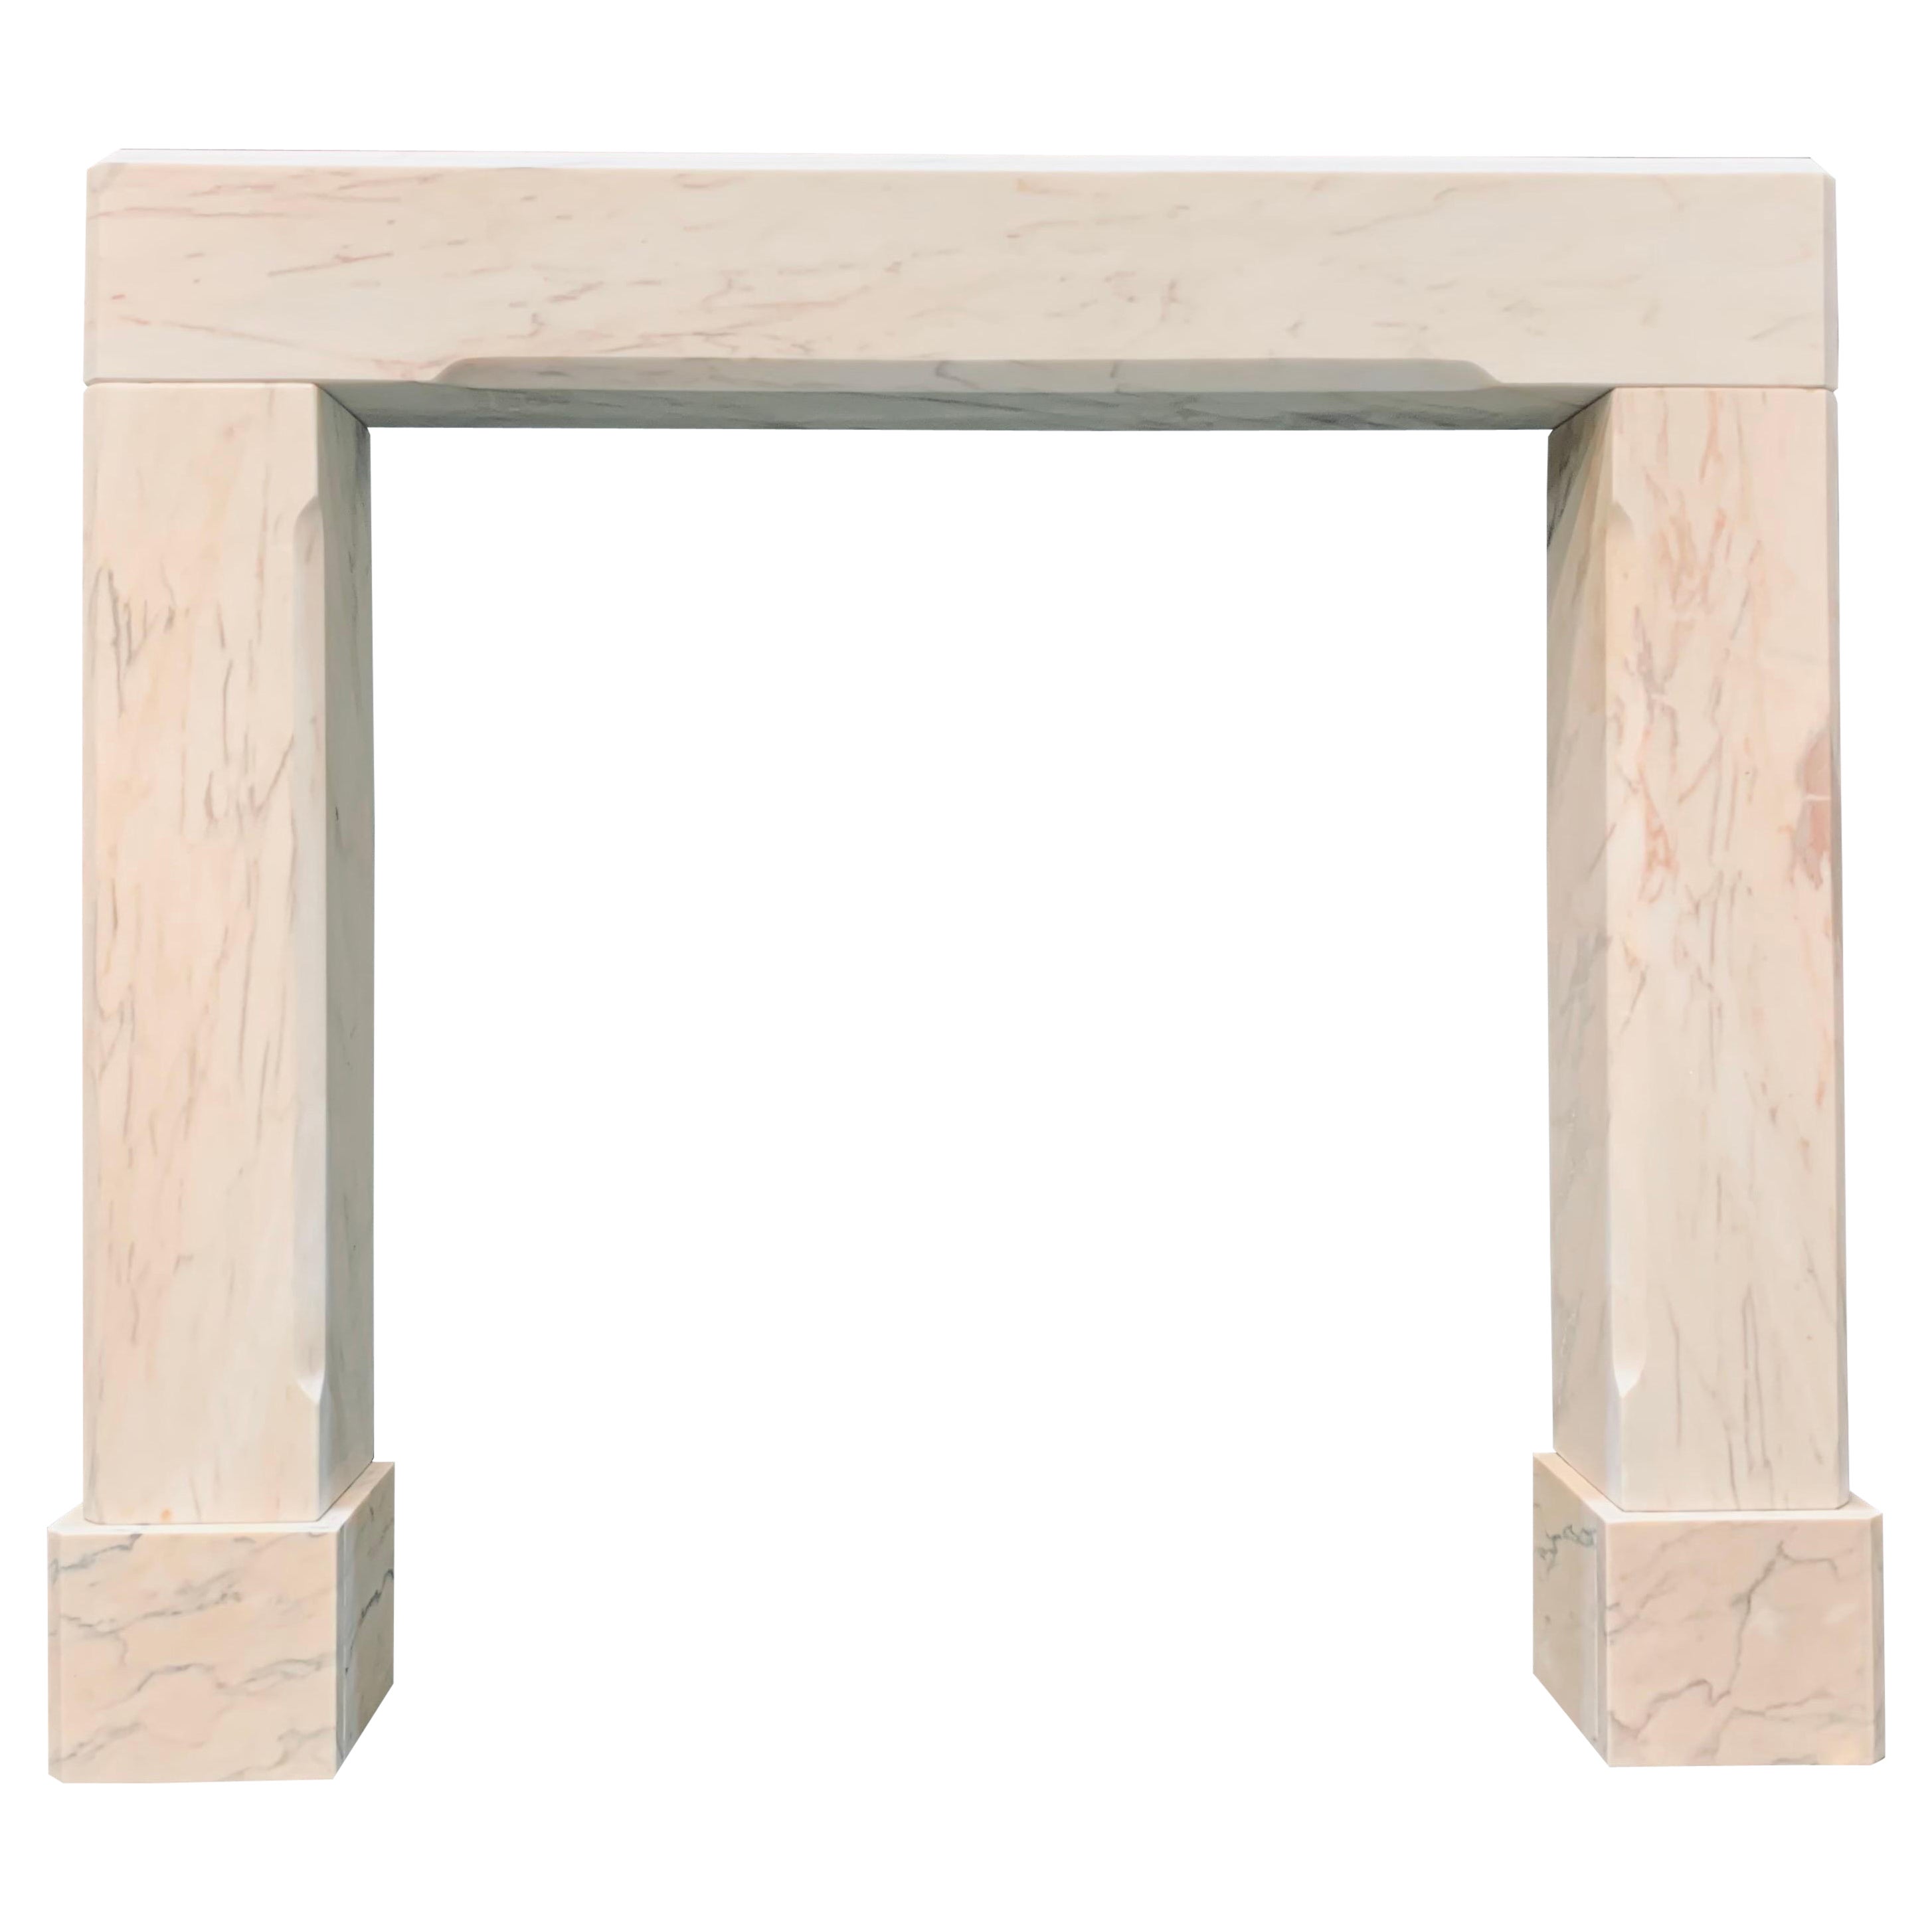 Edwardian Solid Marble Fireplace Surround For Sale